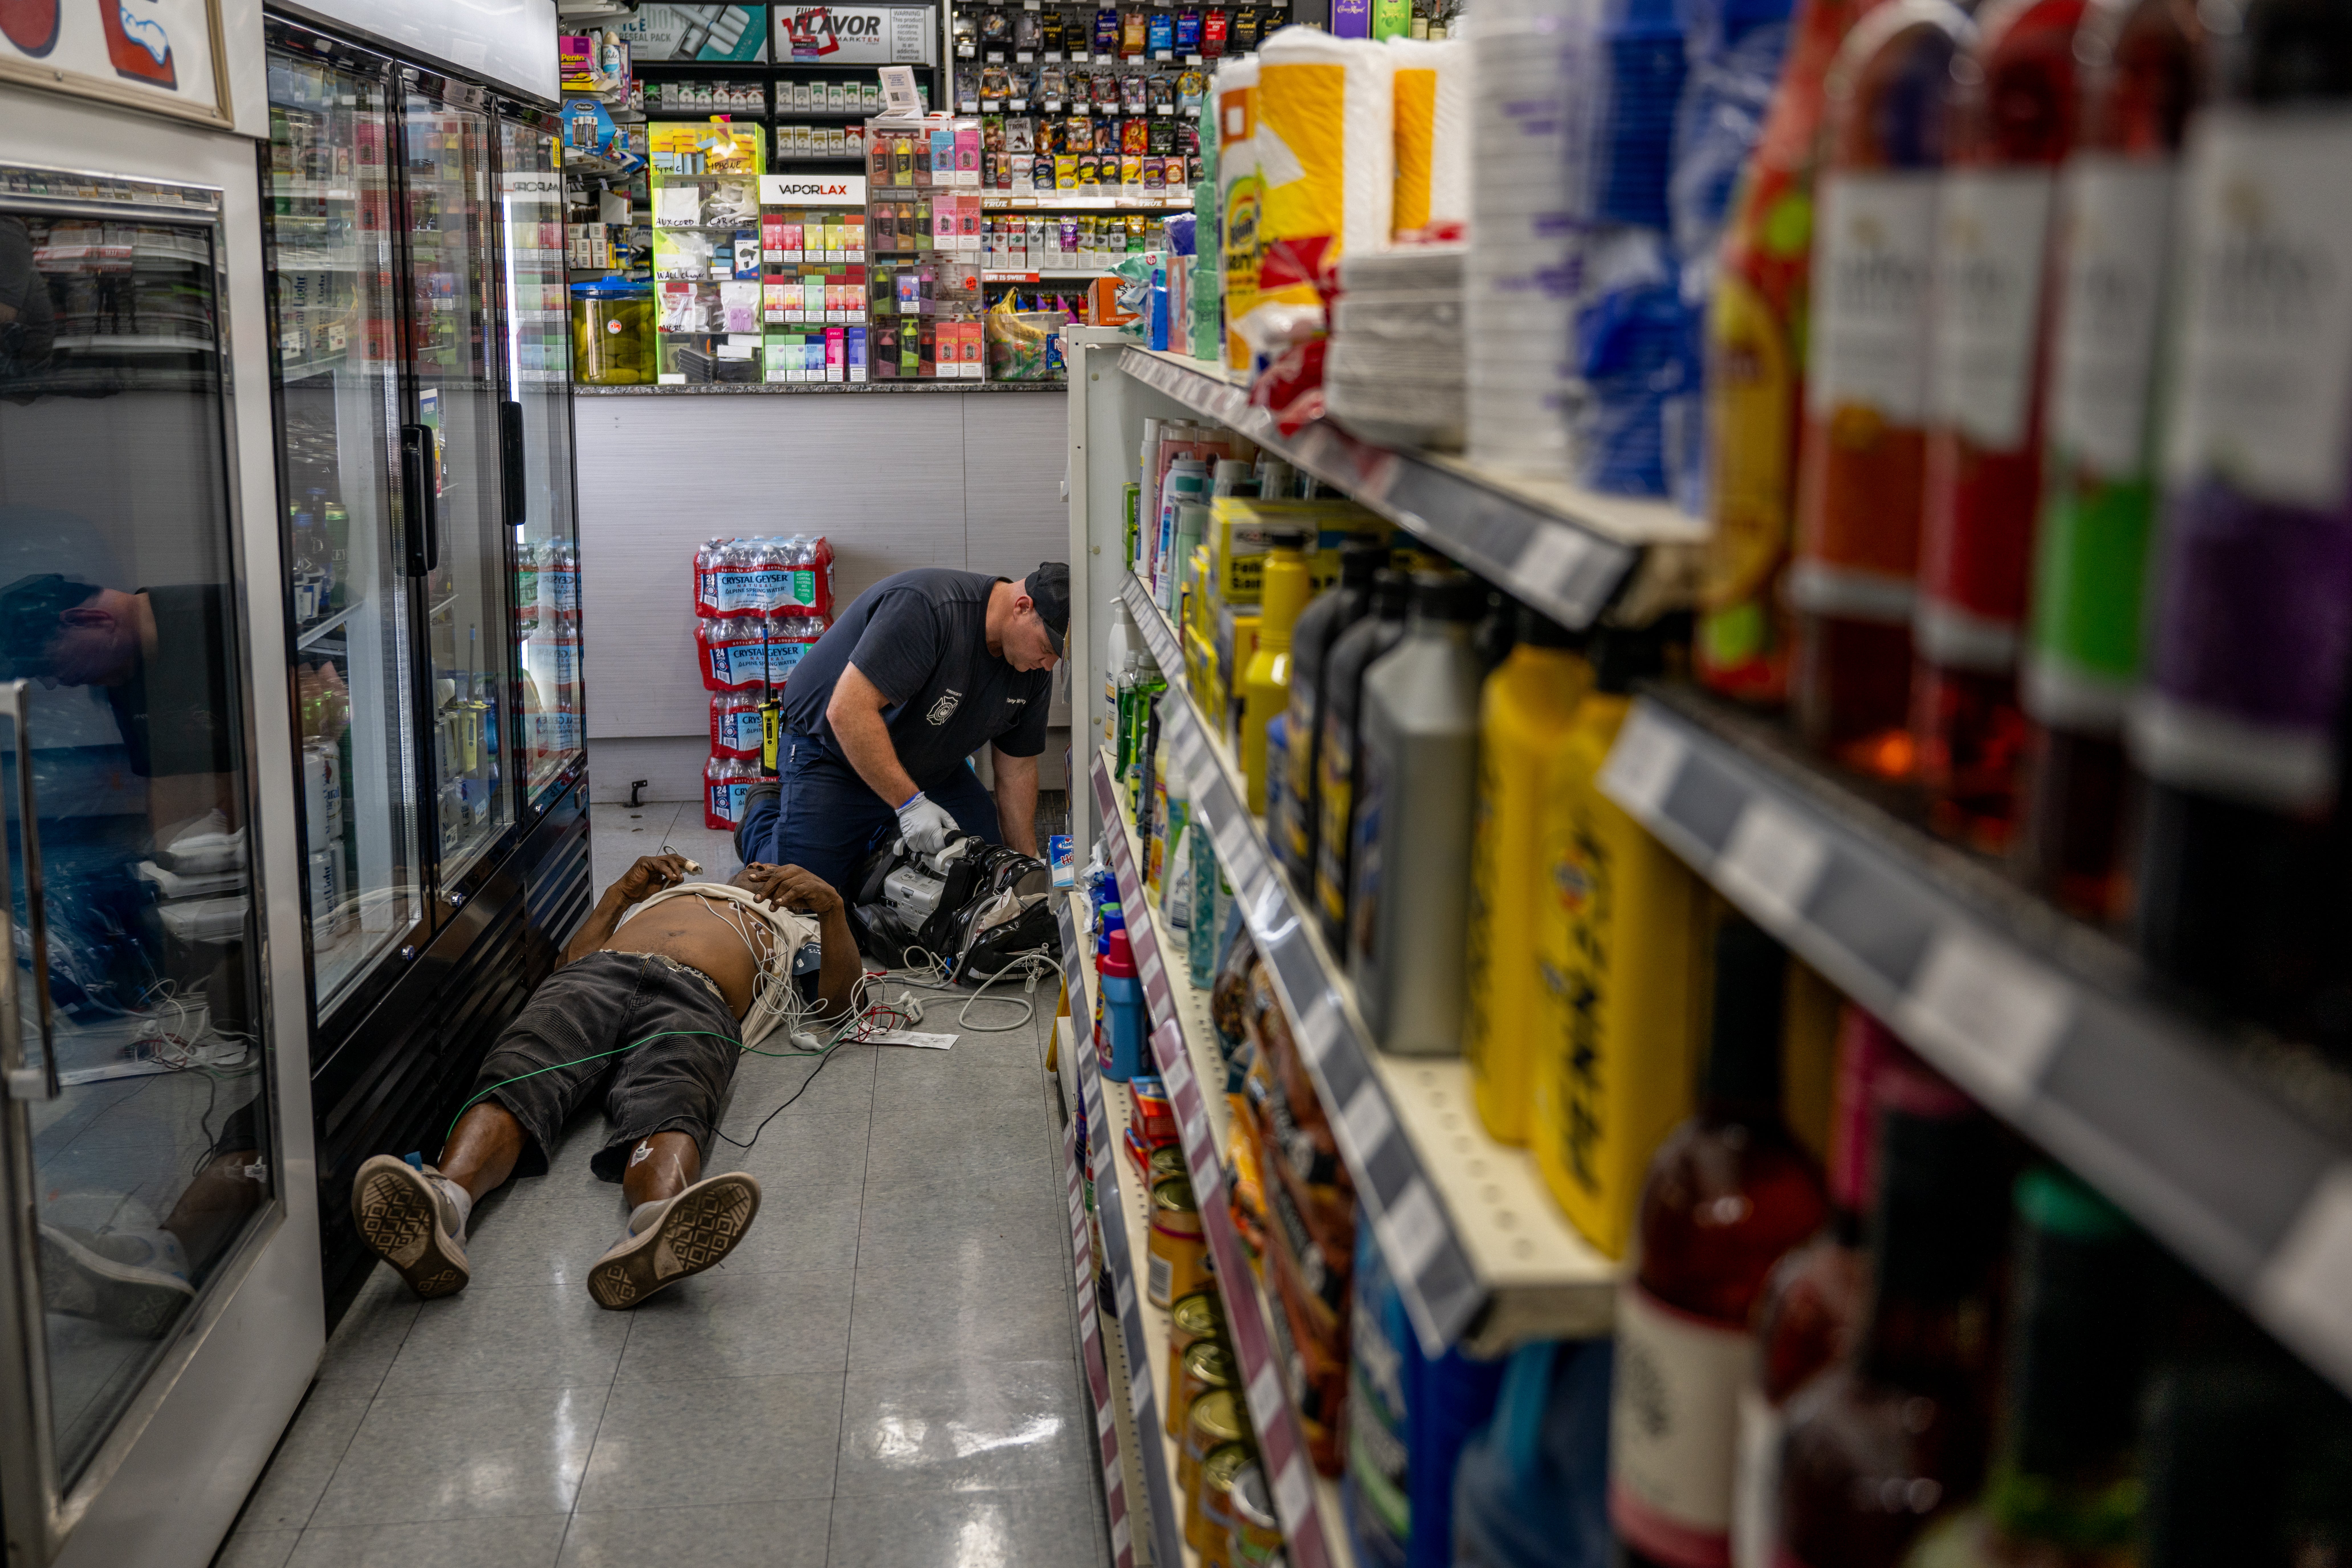 A person receives medical attention after collapsing in a convenience store on July 13, 2023 in Phoenix, Arizona. EMT was called after the person said they experienced hot flashes, dizziness, fatigue and chest pain